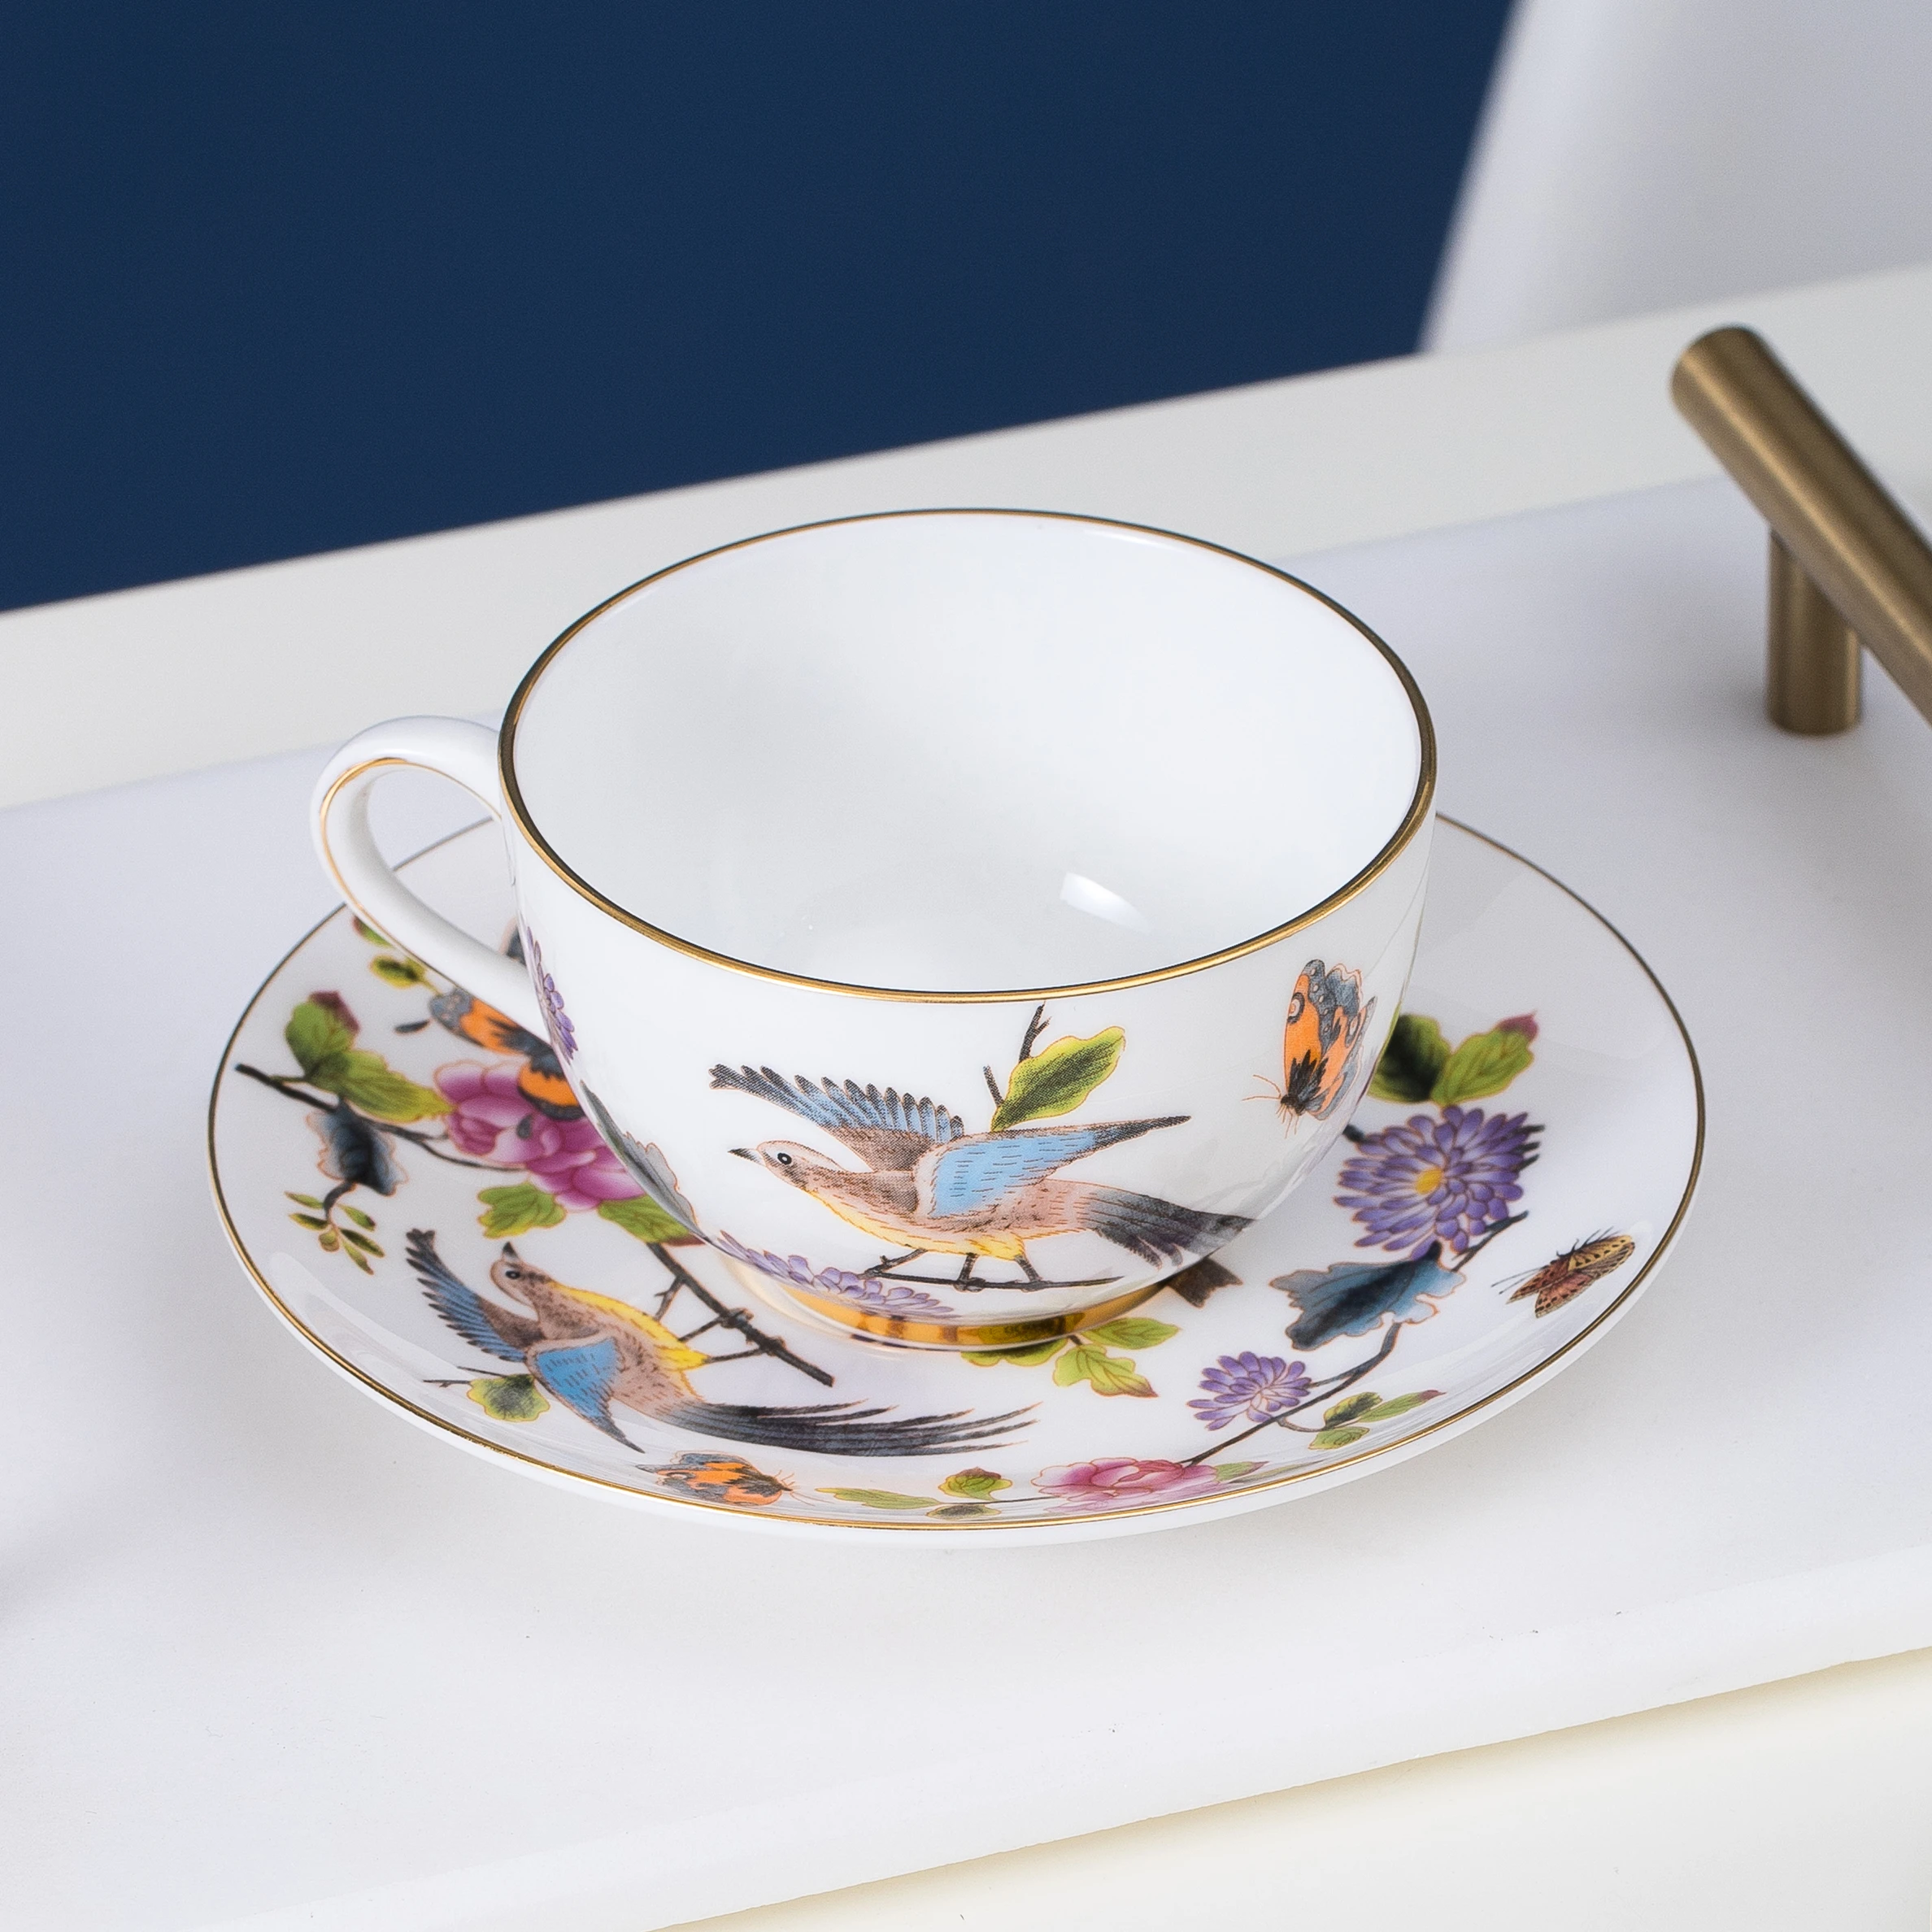 

Fancy Ceramic Teacup Vintage British Coffee Cup and Saucer Bird Floral Decal Design Bone China Coffee Cup Set